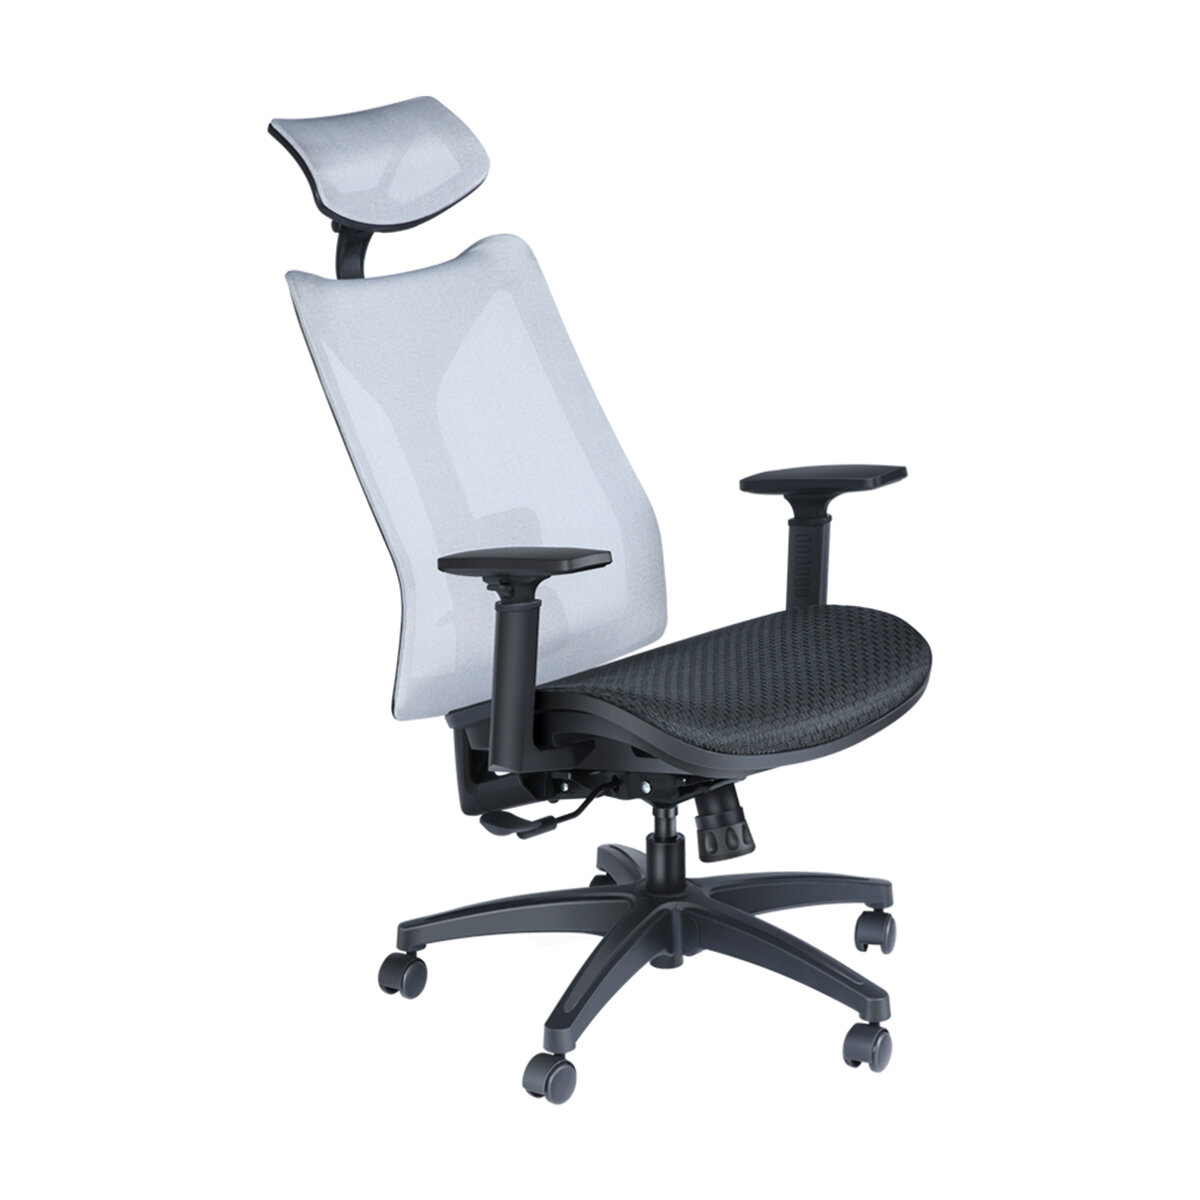 BlitzWolf® BW-HOC4 Mesh Chair Ergonomic Design Office Chair With Lumbar Support & Tilt + Rocking Removable And Adjustable Herdrest Office Home